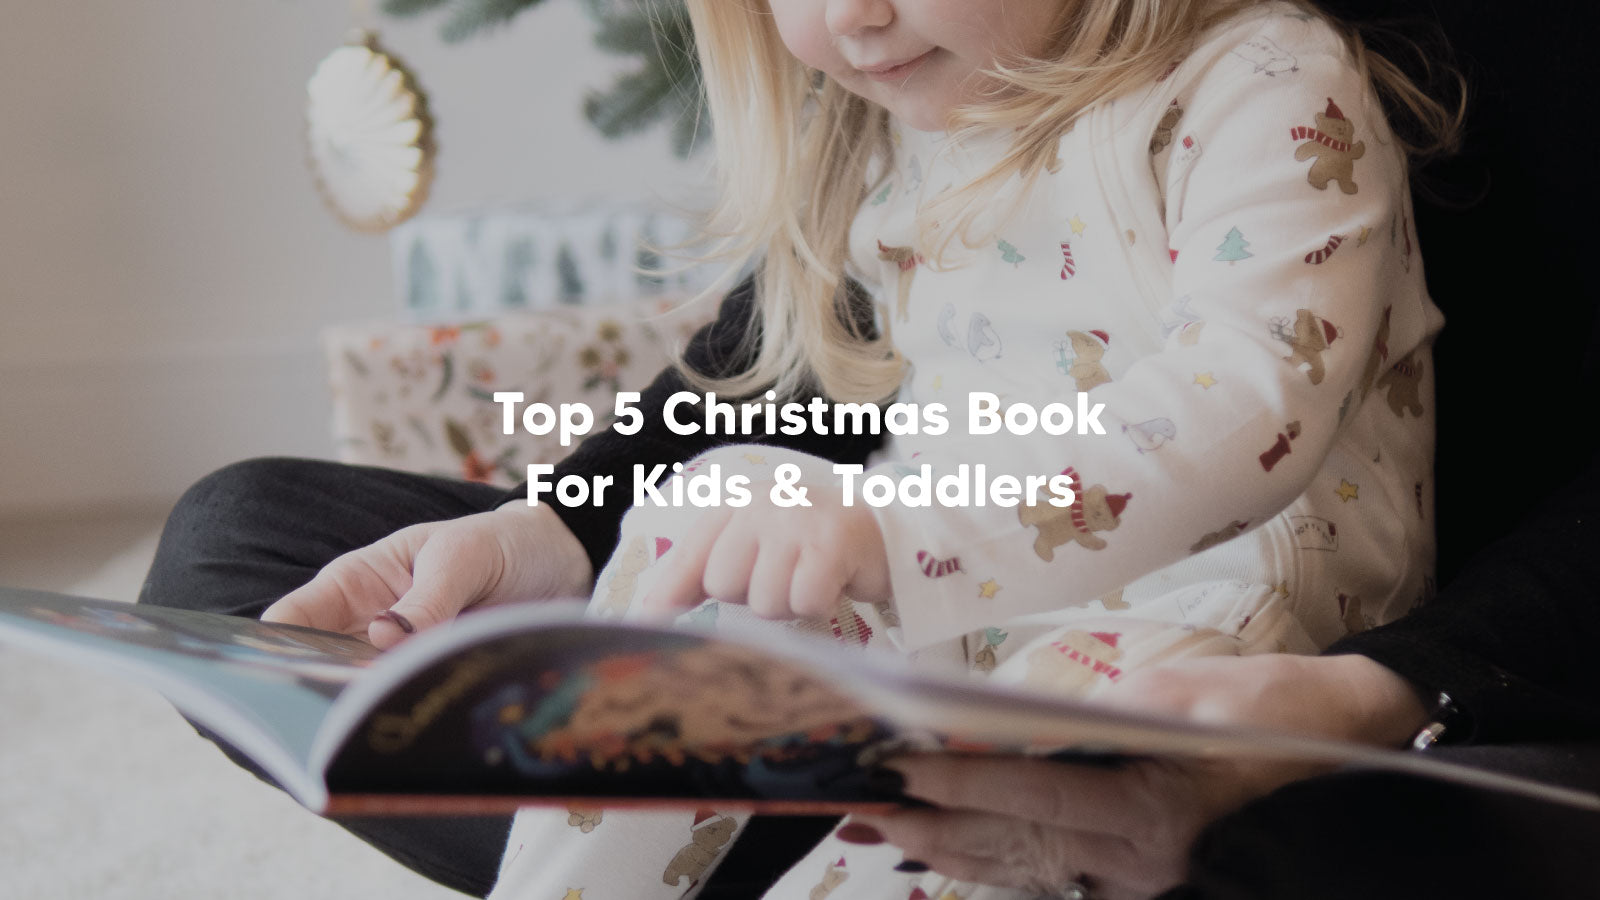 Top 5 Christmas Books For Kids & Toddlers